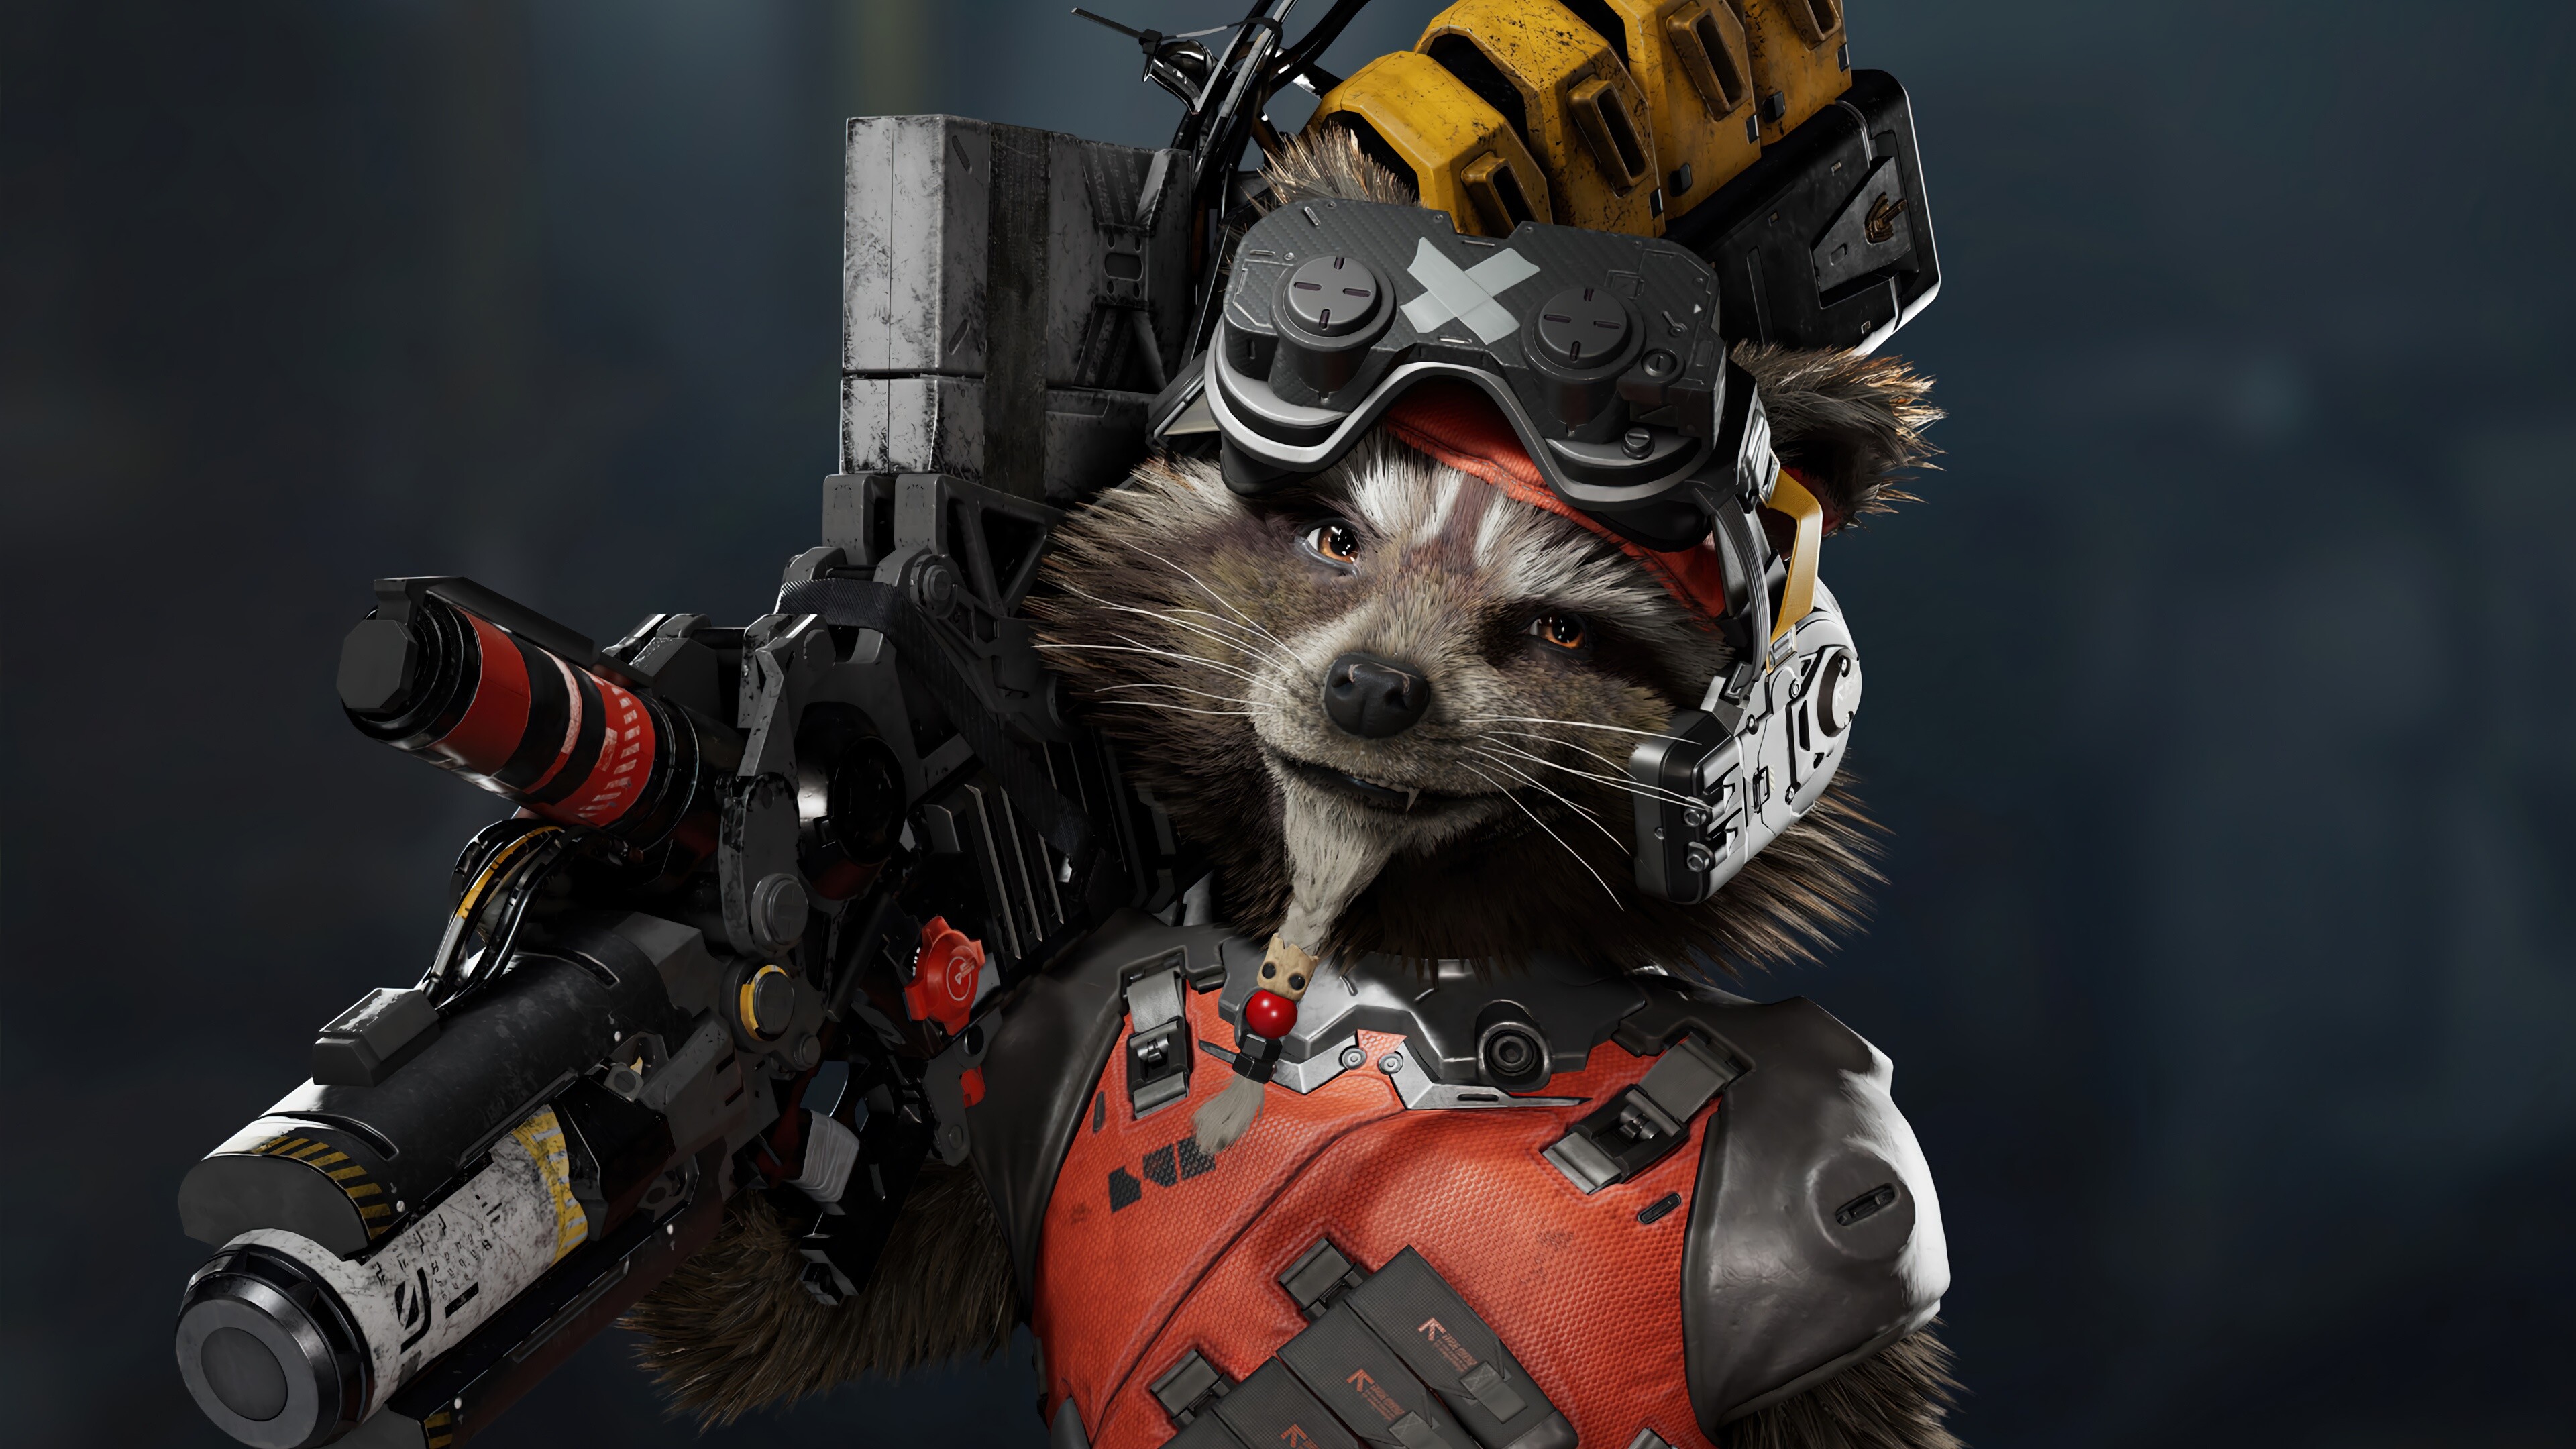 Marvel's Guardians of the Galaxy: Rocket Raccoon, The game was released for Nintendo Switch, PlayStation 4, PlayStation 5, Windows, Xbox One, and Xbox Series X, S on October 26, 2021. 3840x2160 4K Background.